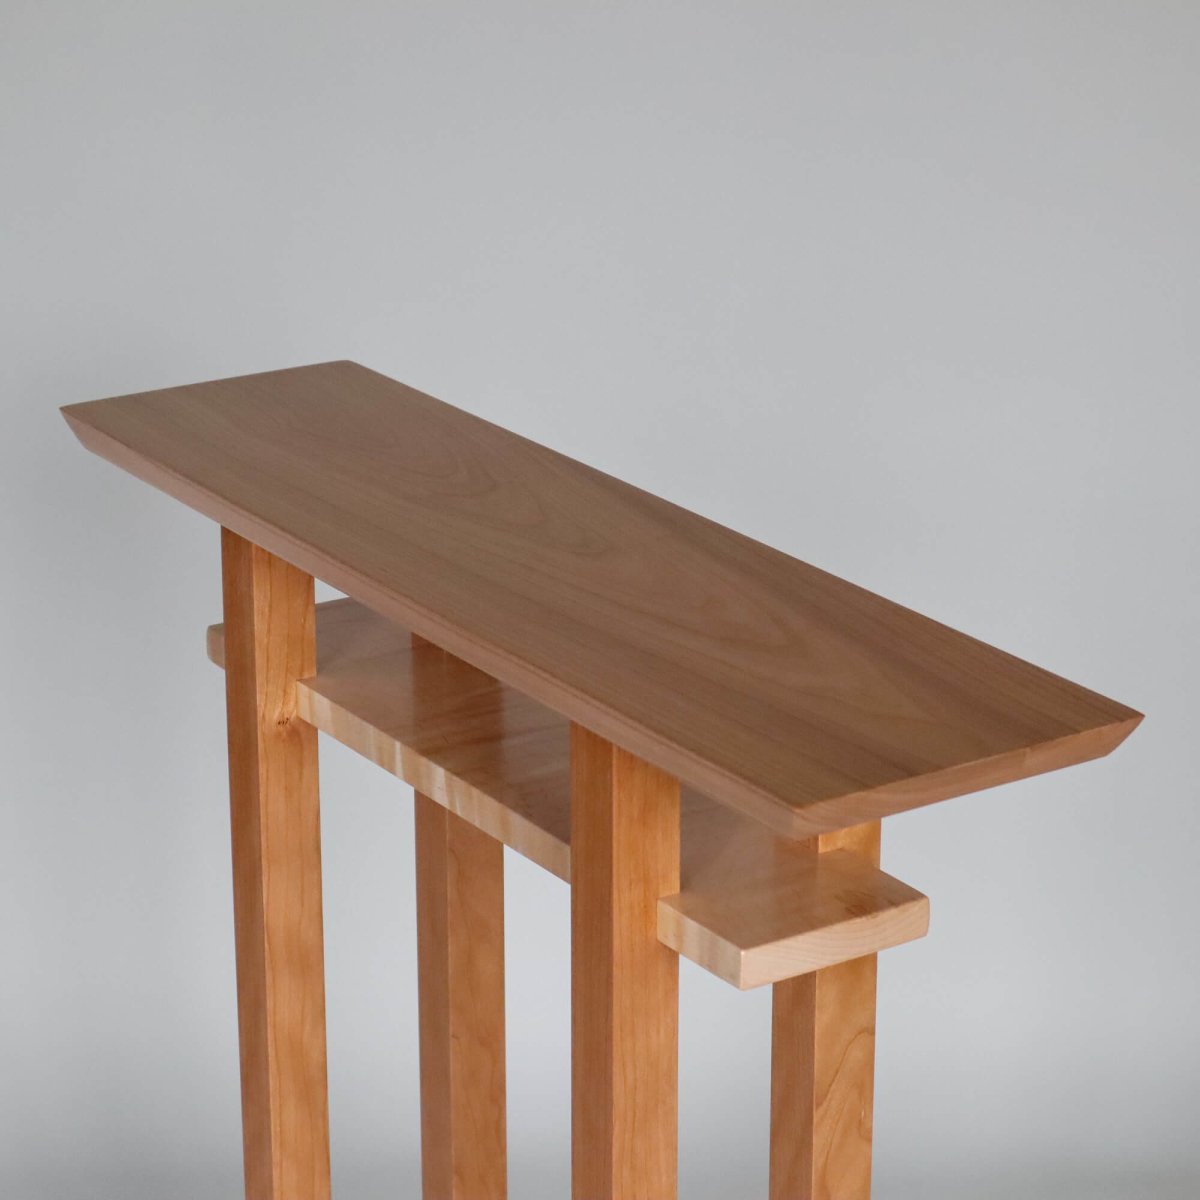 cherry side table, entryway table, small space decorating solution by Mokuzai Furniture